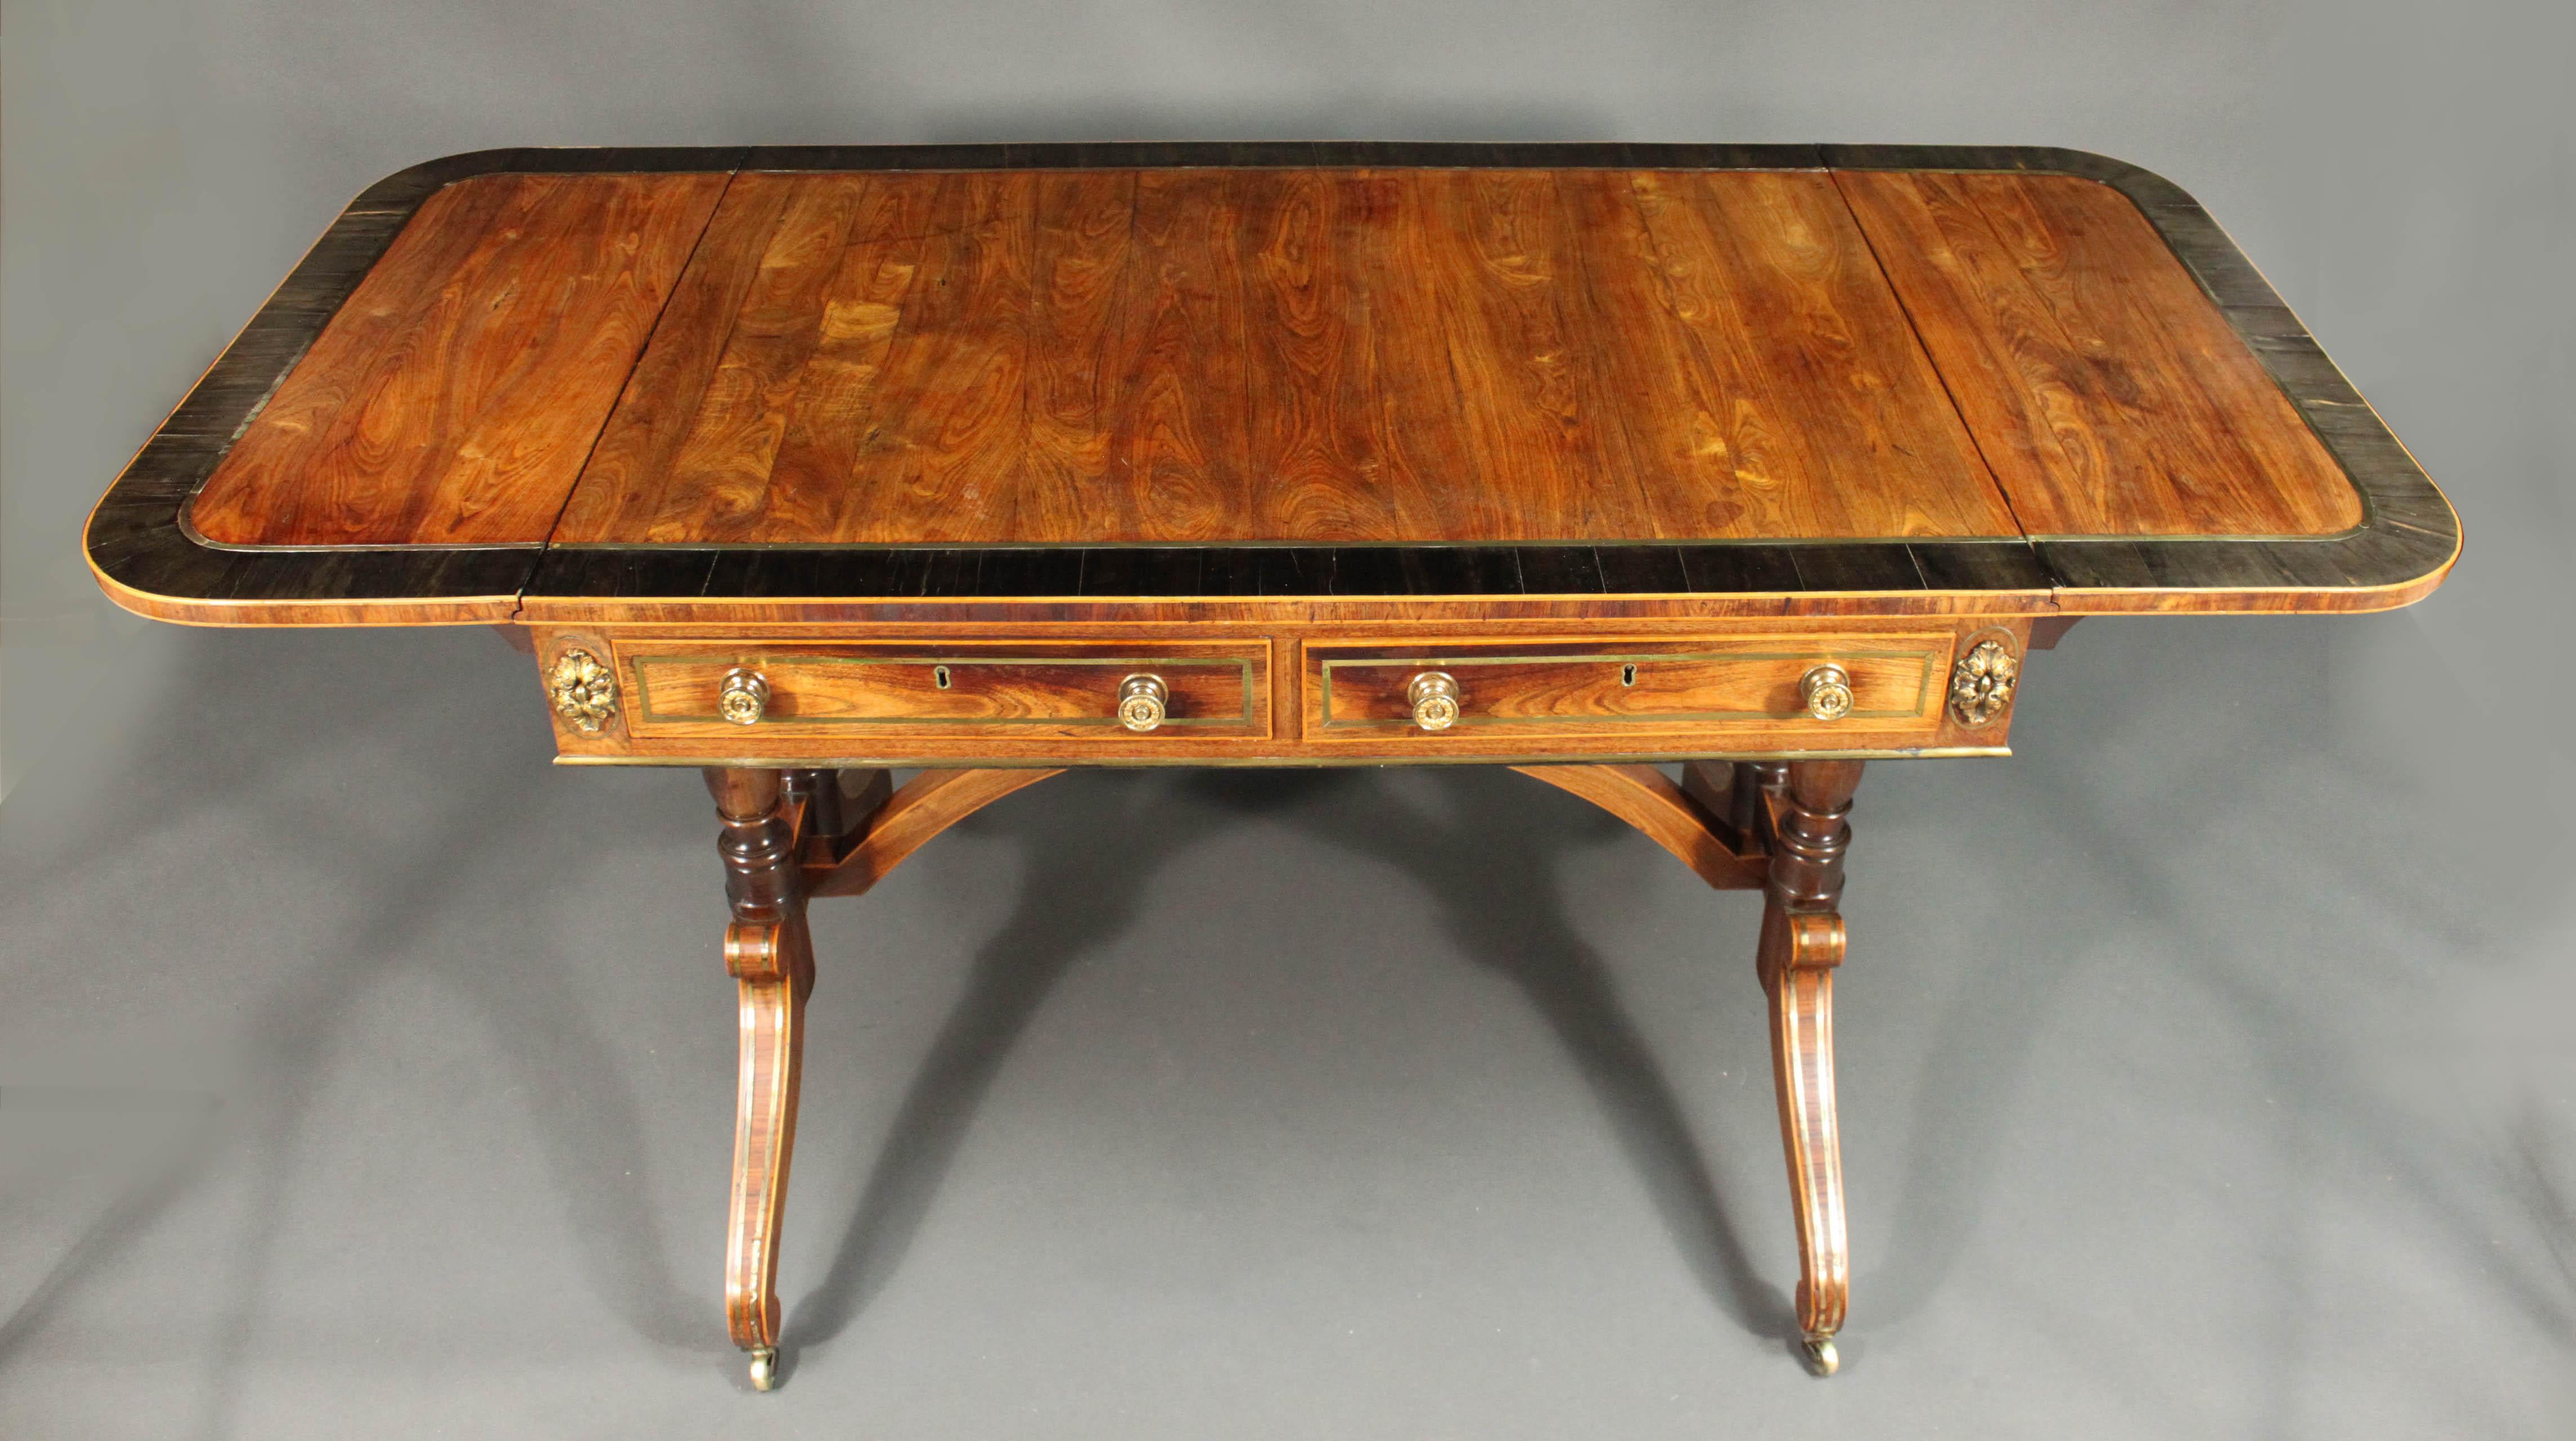 Regency Brass Inlaid Sofa Table in Kingwood In Good Condition For Sale In Bradford-on-Avon, Wiltshire